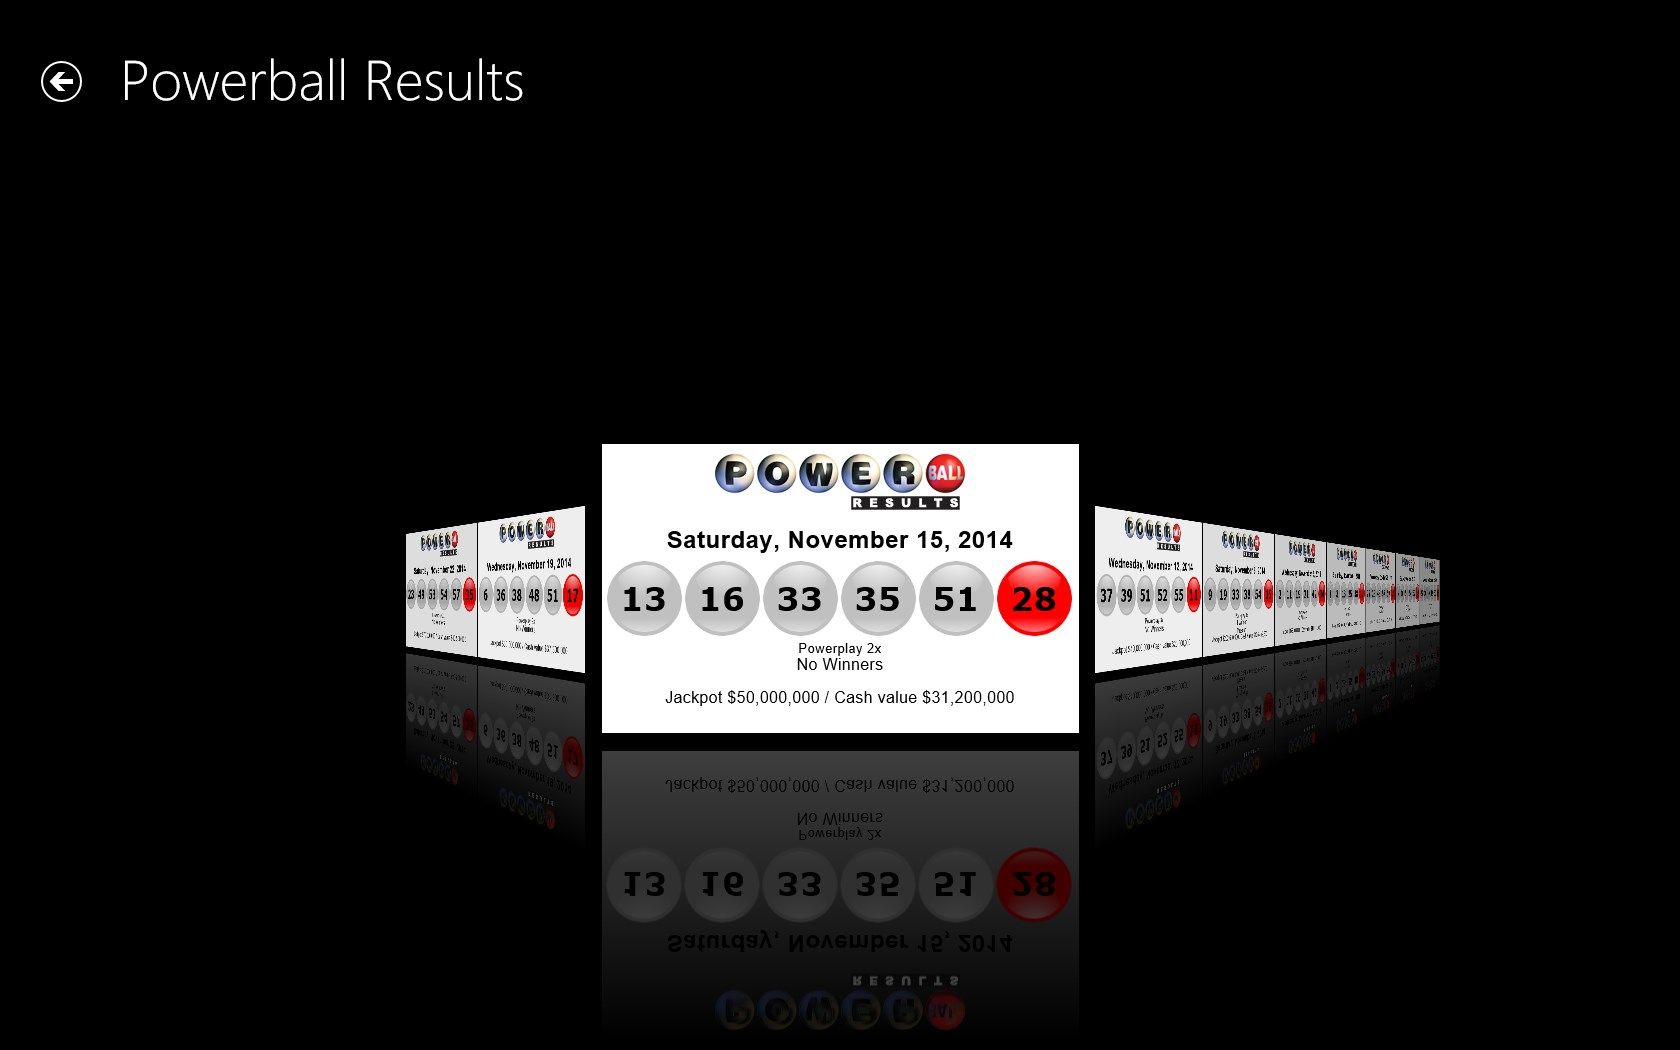 Get previous results for Powerball